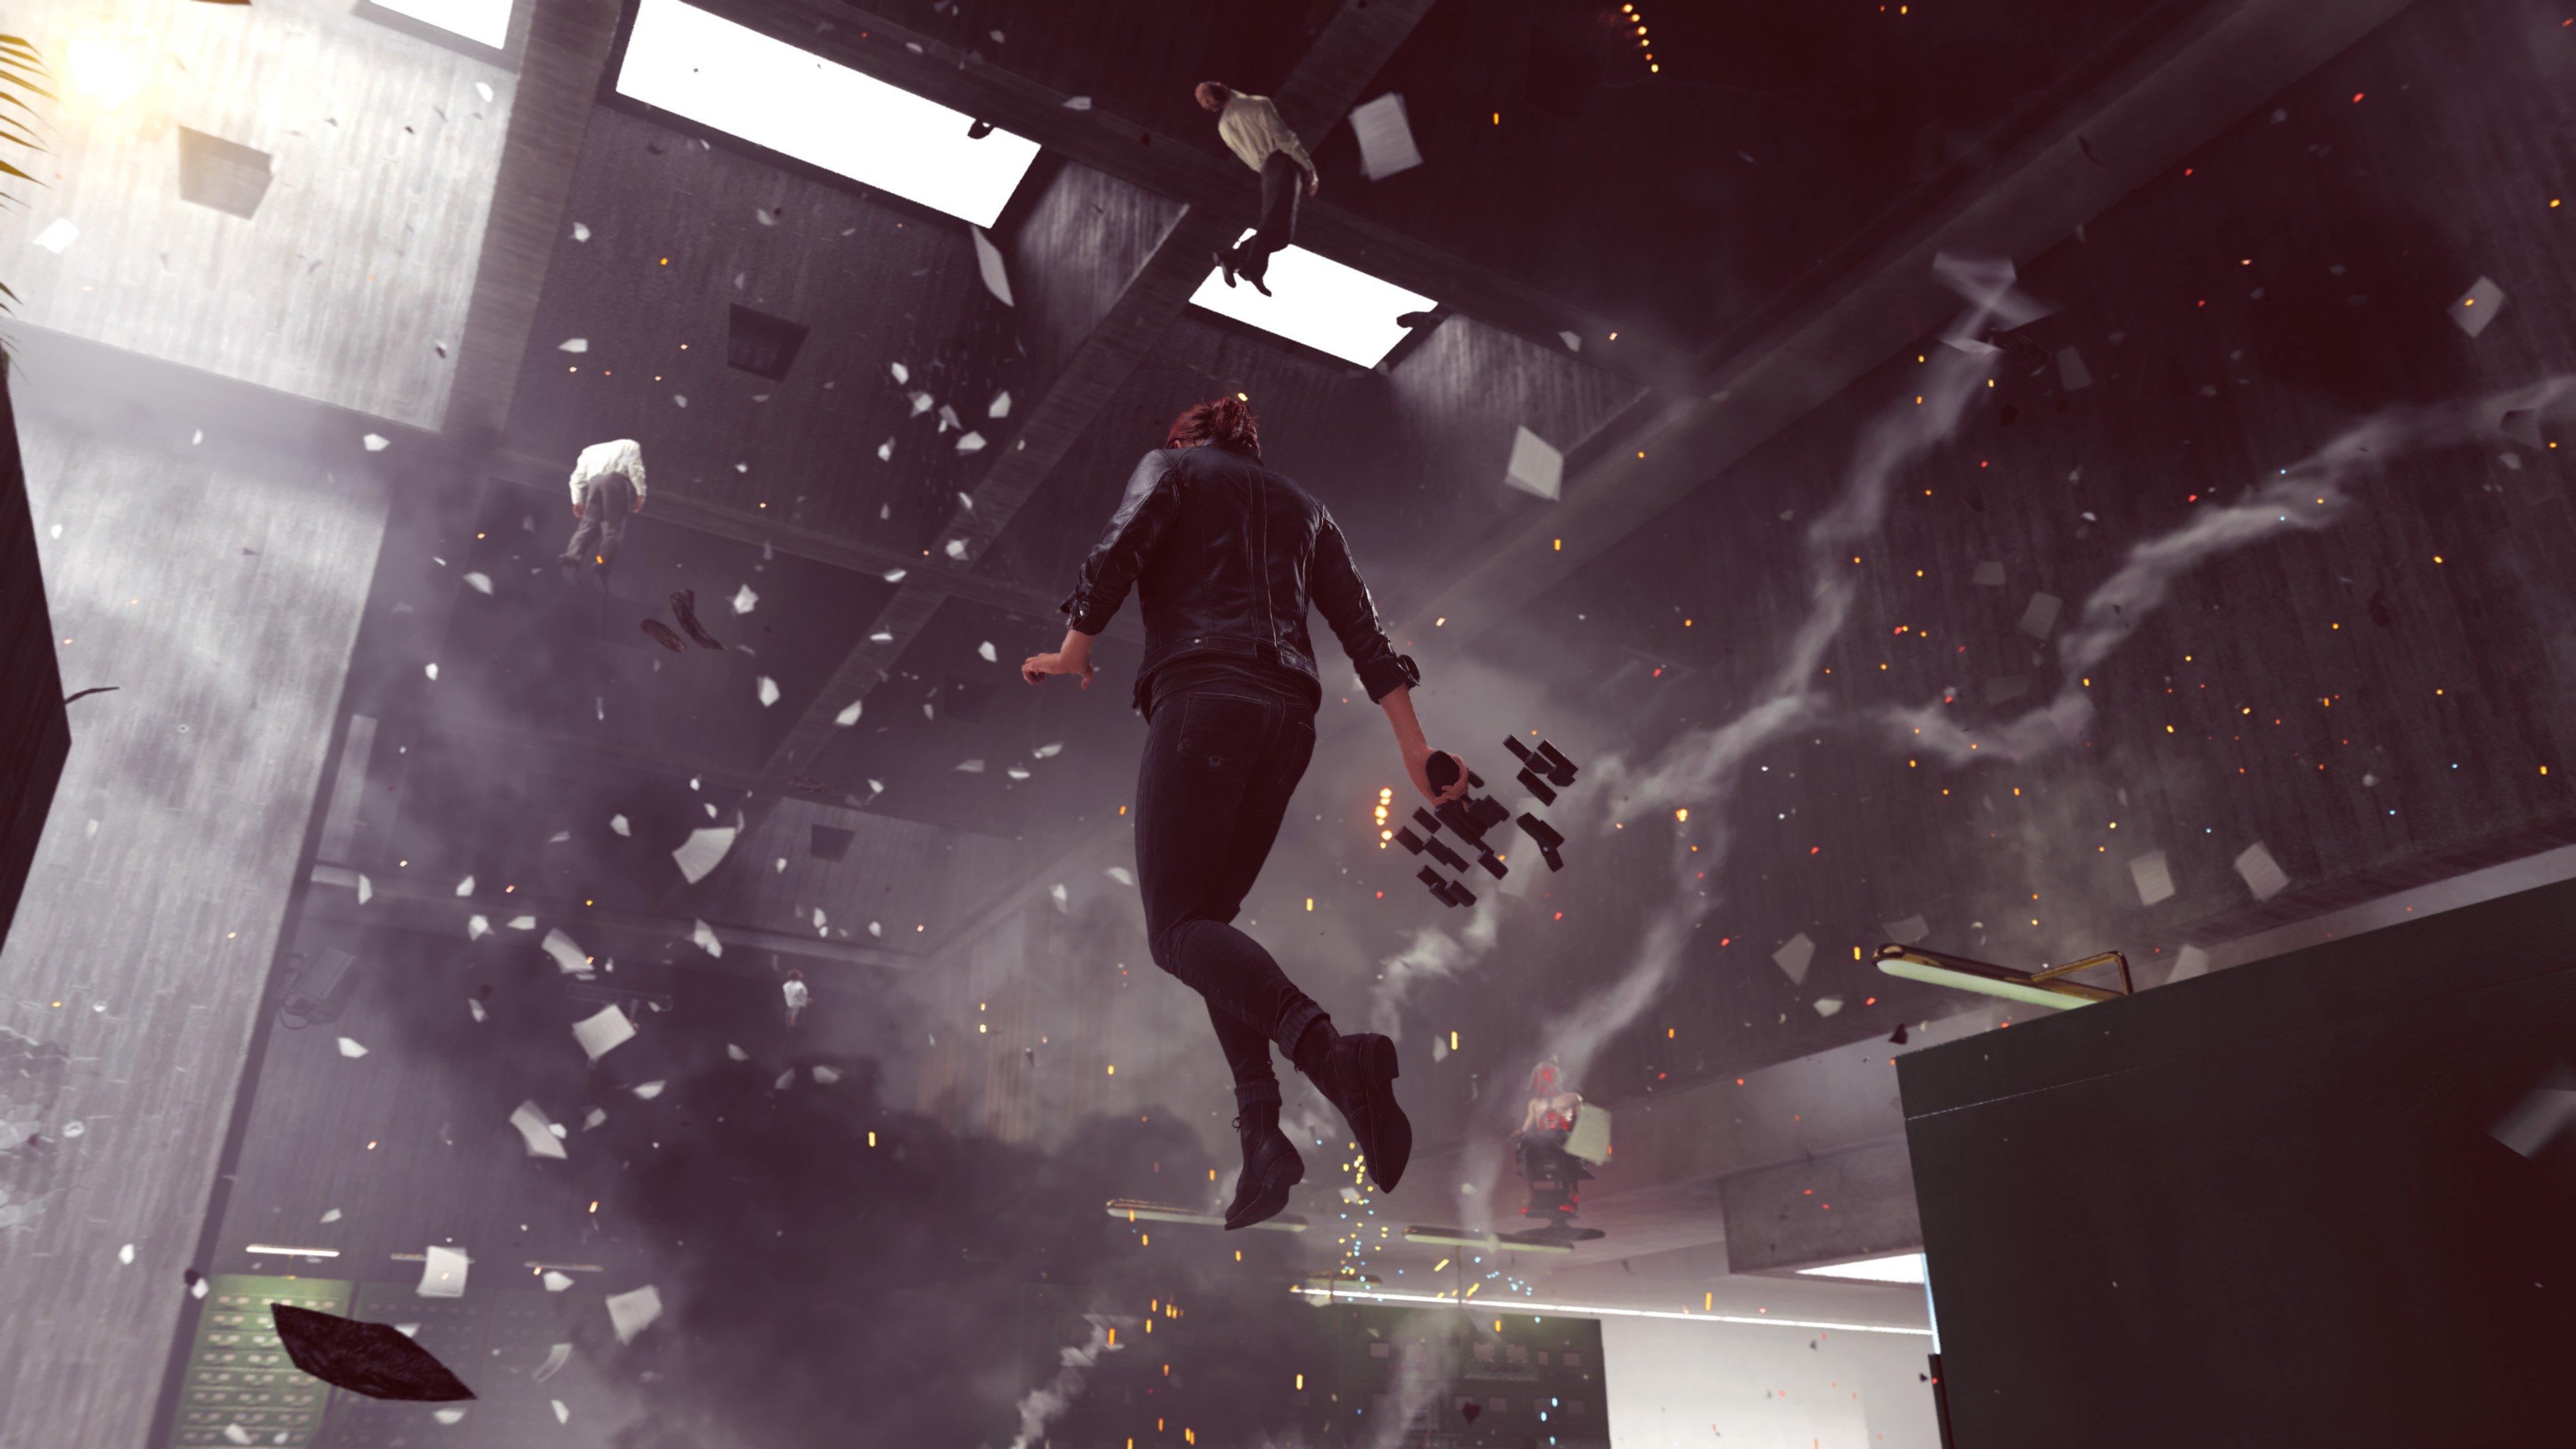 Remedy's new game Control detailed in fresh 4K screenshots